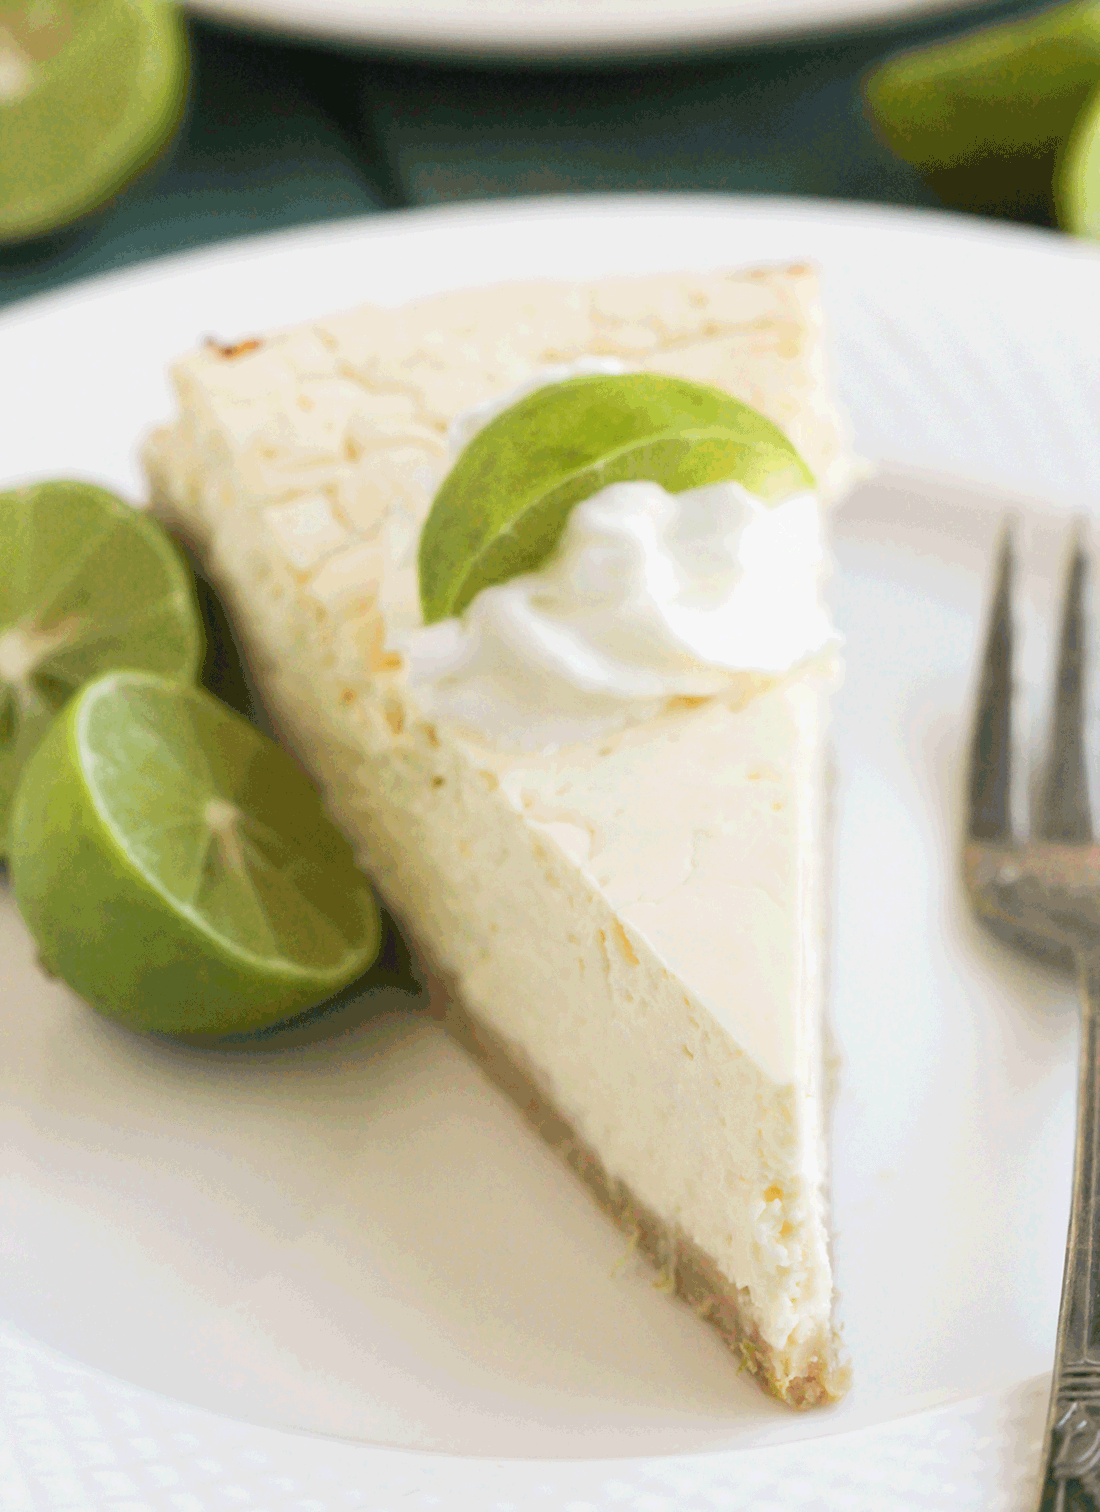 This Healthy Key Lime Cheesecake tastes like Key Lime Pie but in CHEESECAKE form! Each bite is sweet, refreshing, and delicious, you'd never suspect it's sugar free, gluten free, and high protein. -- Healthy Dessert Recipes with sugar free, low calorie, low fat, high protein, gluten free, dairy free and vegan options at the Desserts With Benefits Blog (www.DessertsWithBenefits.com)